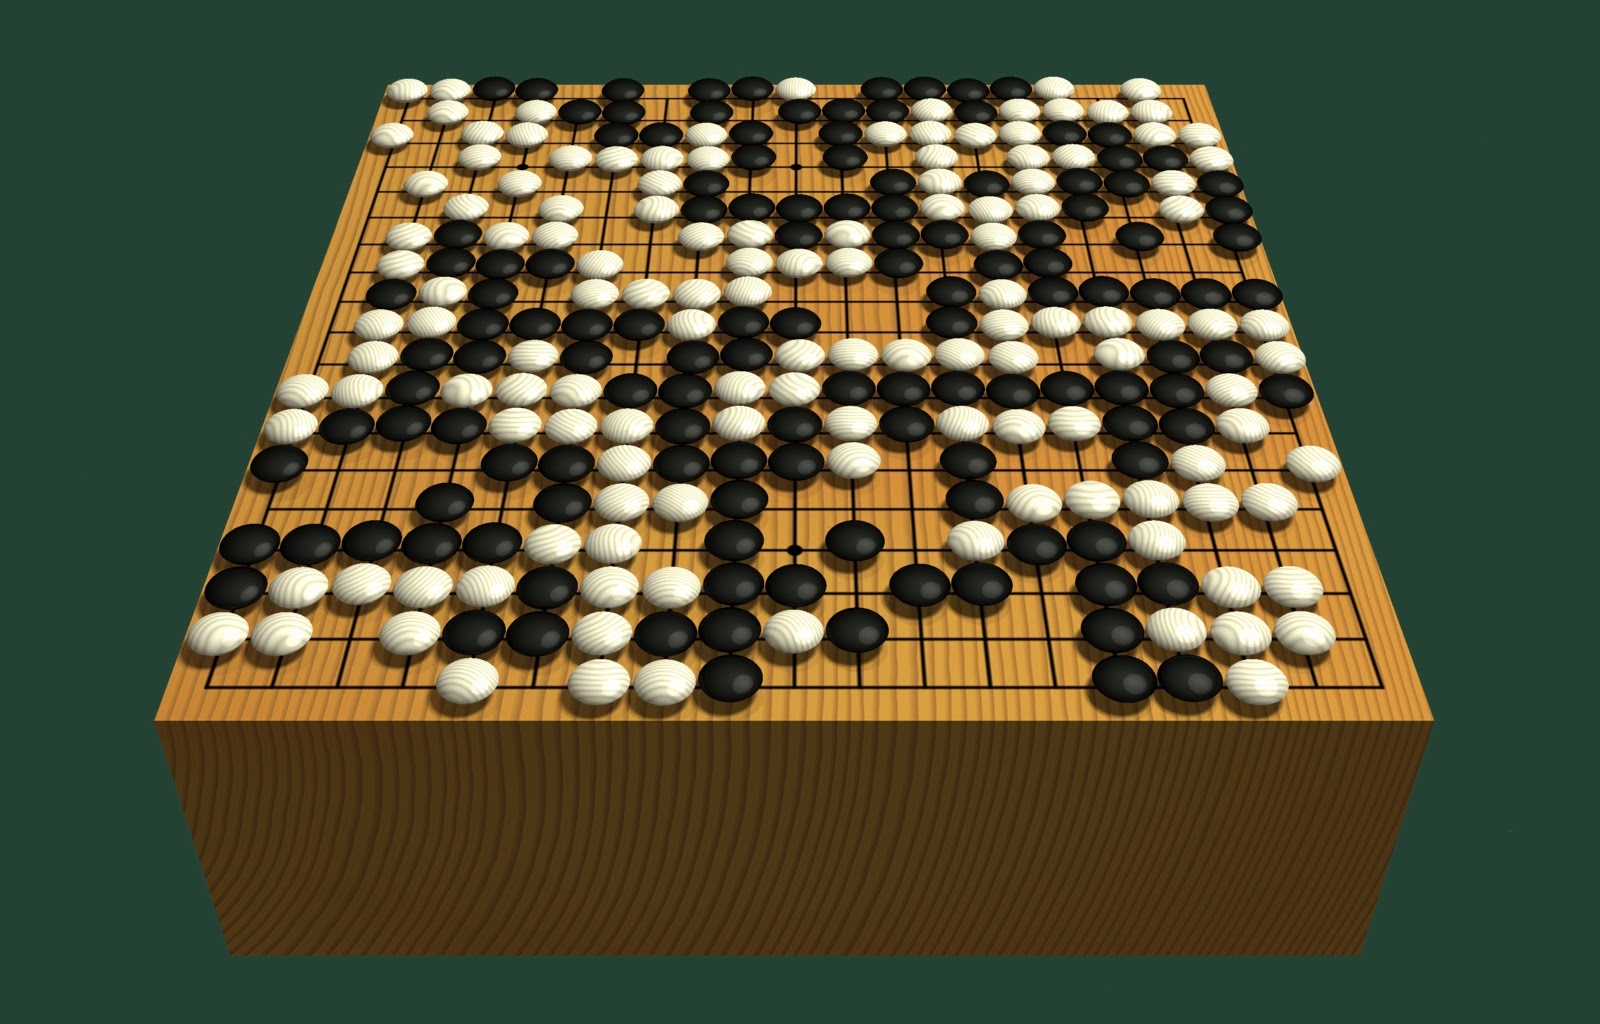 Final position of a game of Go